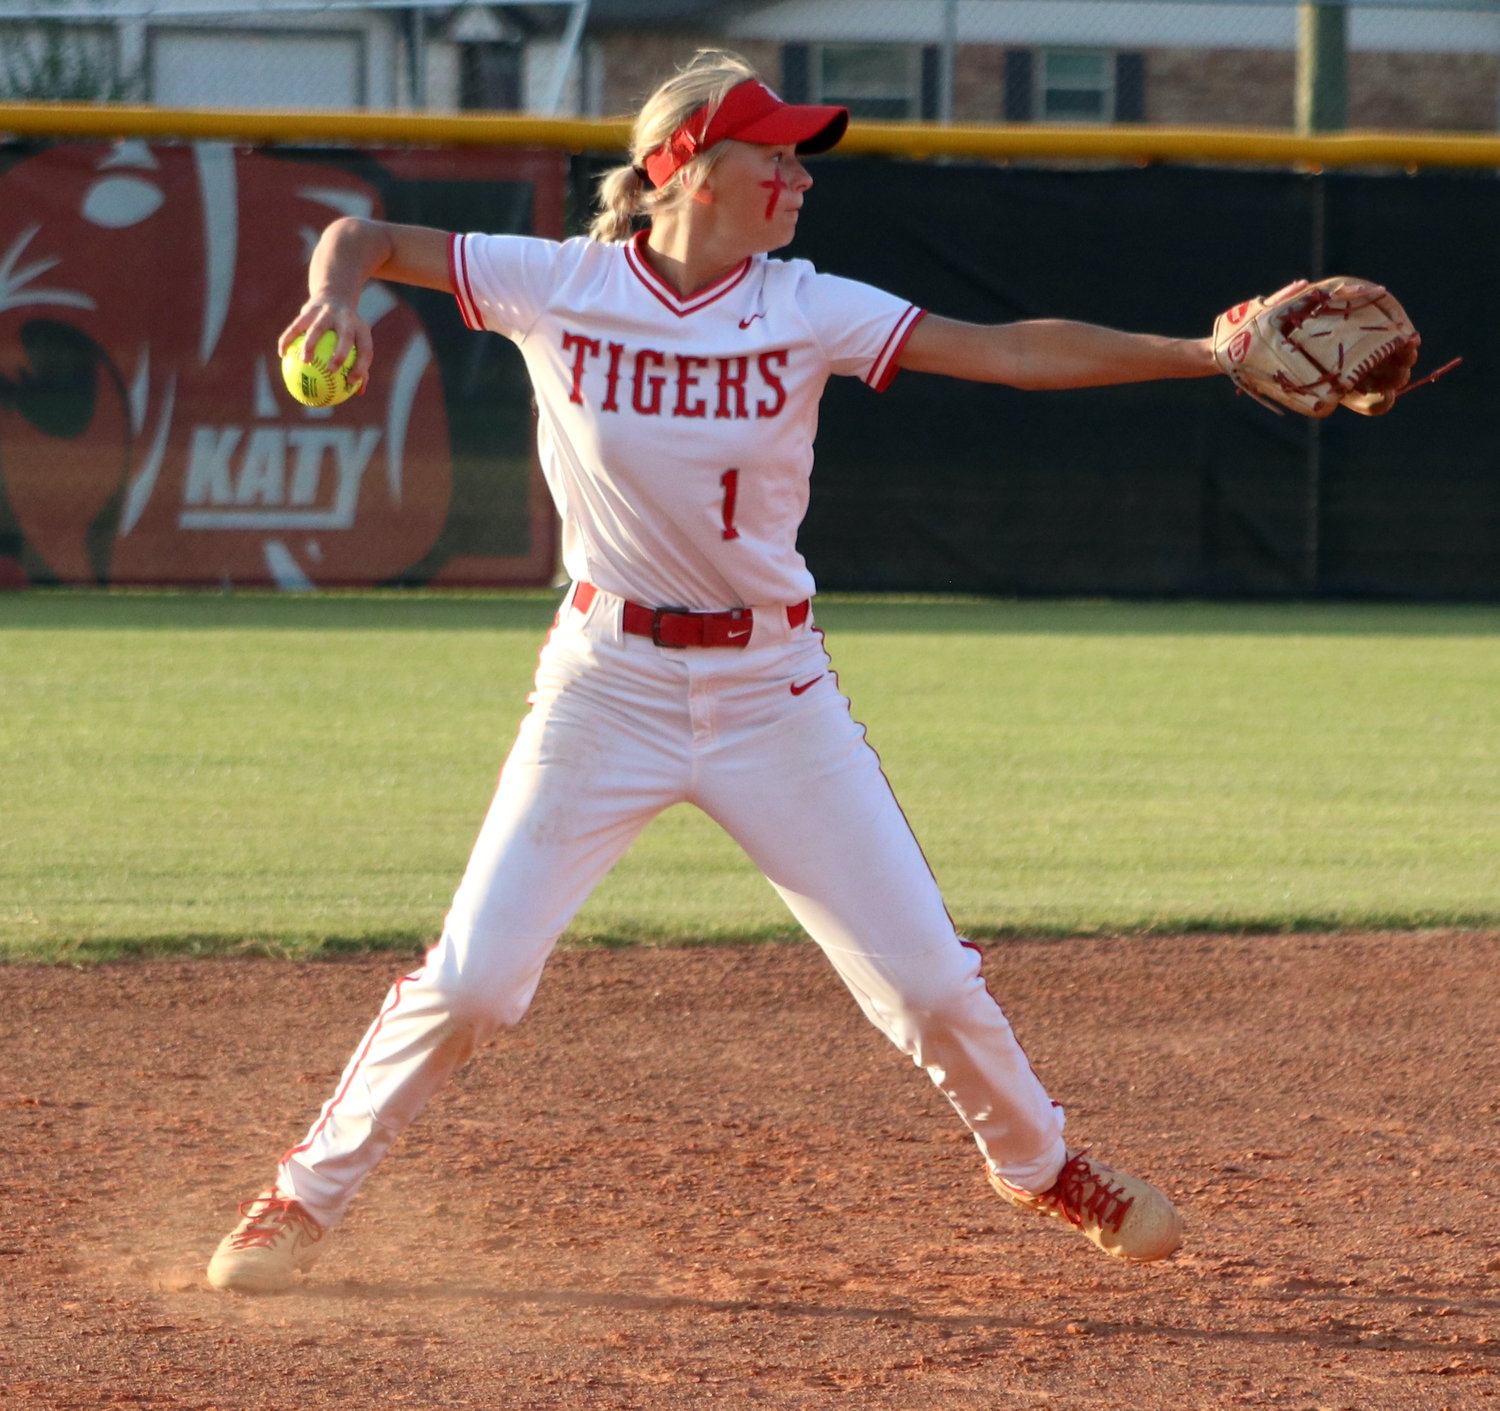 Peyton Watson throws the ball to first base during Wednesday’s Class 6A Regional Semifinal game between Katy and Pearland at the Katy softball field.